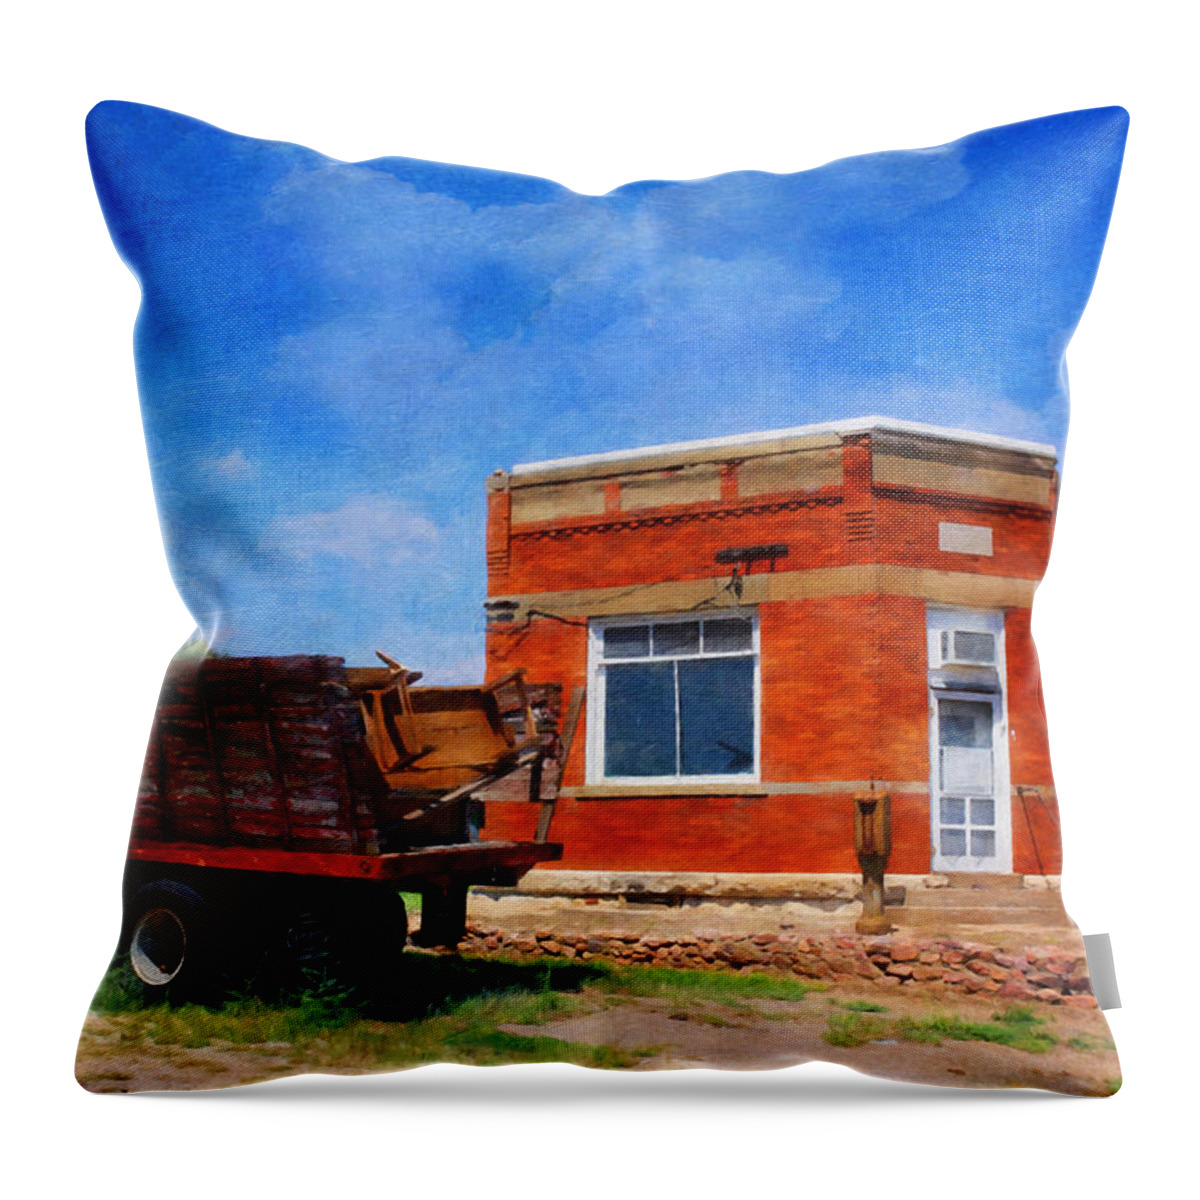 Fina Gas Stations Throw Pillow featuring the photograph Old and Abandoned Fina Gas Station by Anna Louise